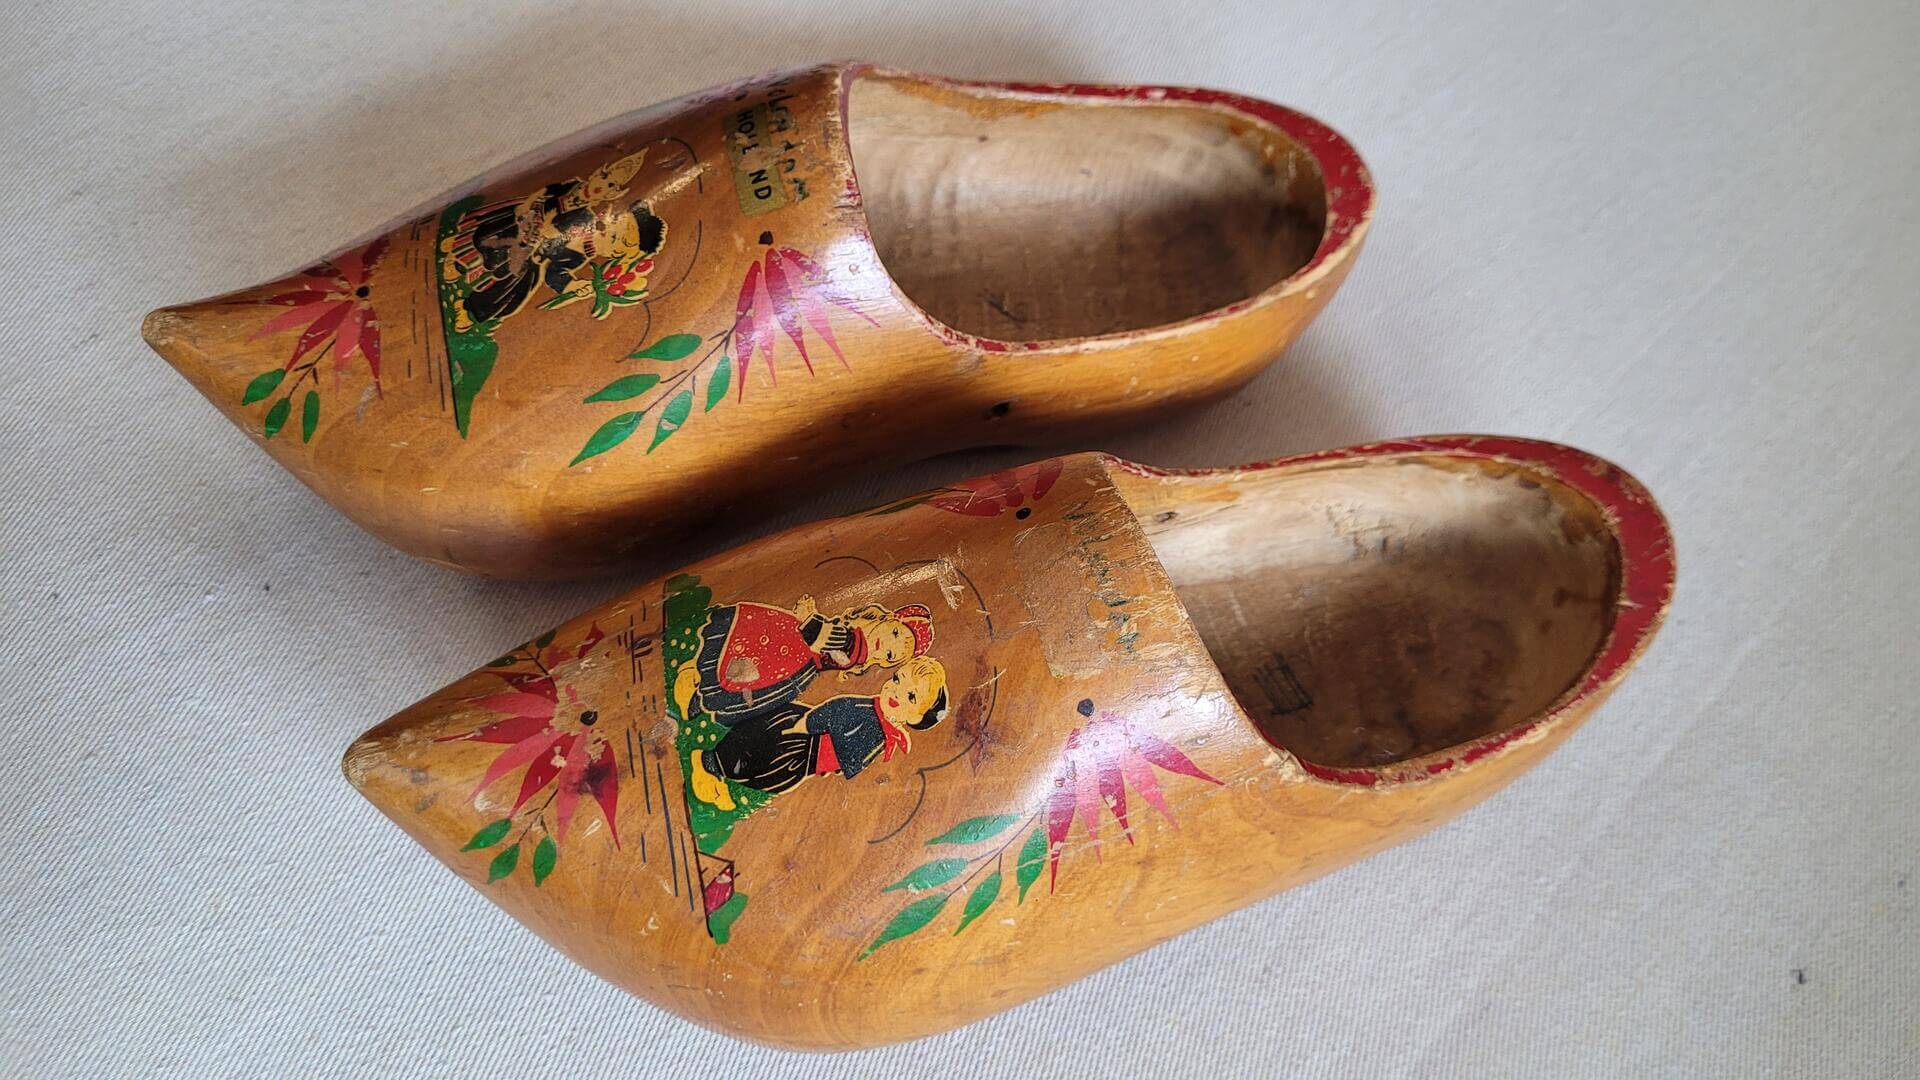 Nice vintage pair of hand painted wooden Dutch clogs with girls motif. Antique made in Holland collectible decorative hand made wood objects and art